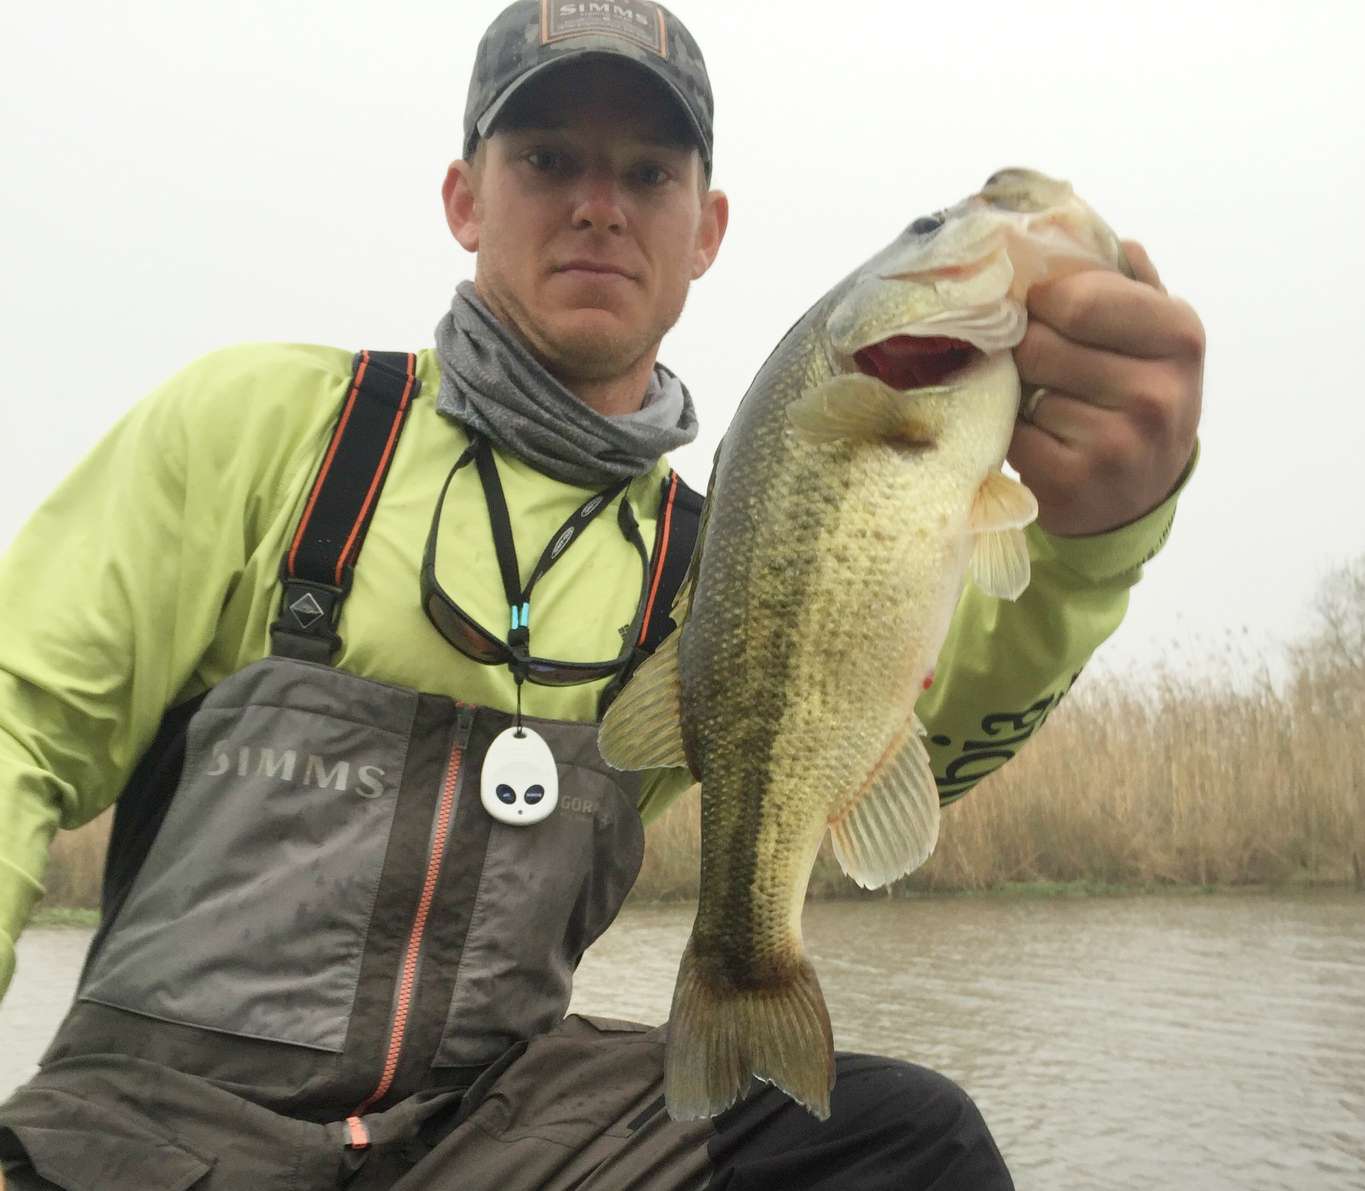 Micah Frazier on the board Day 3.
<br>Photo by Bassmaster Marshal Mark Williams